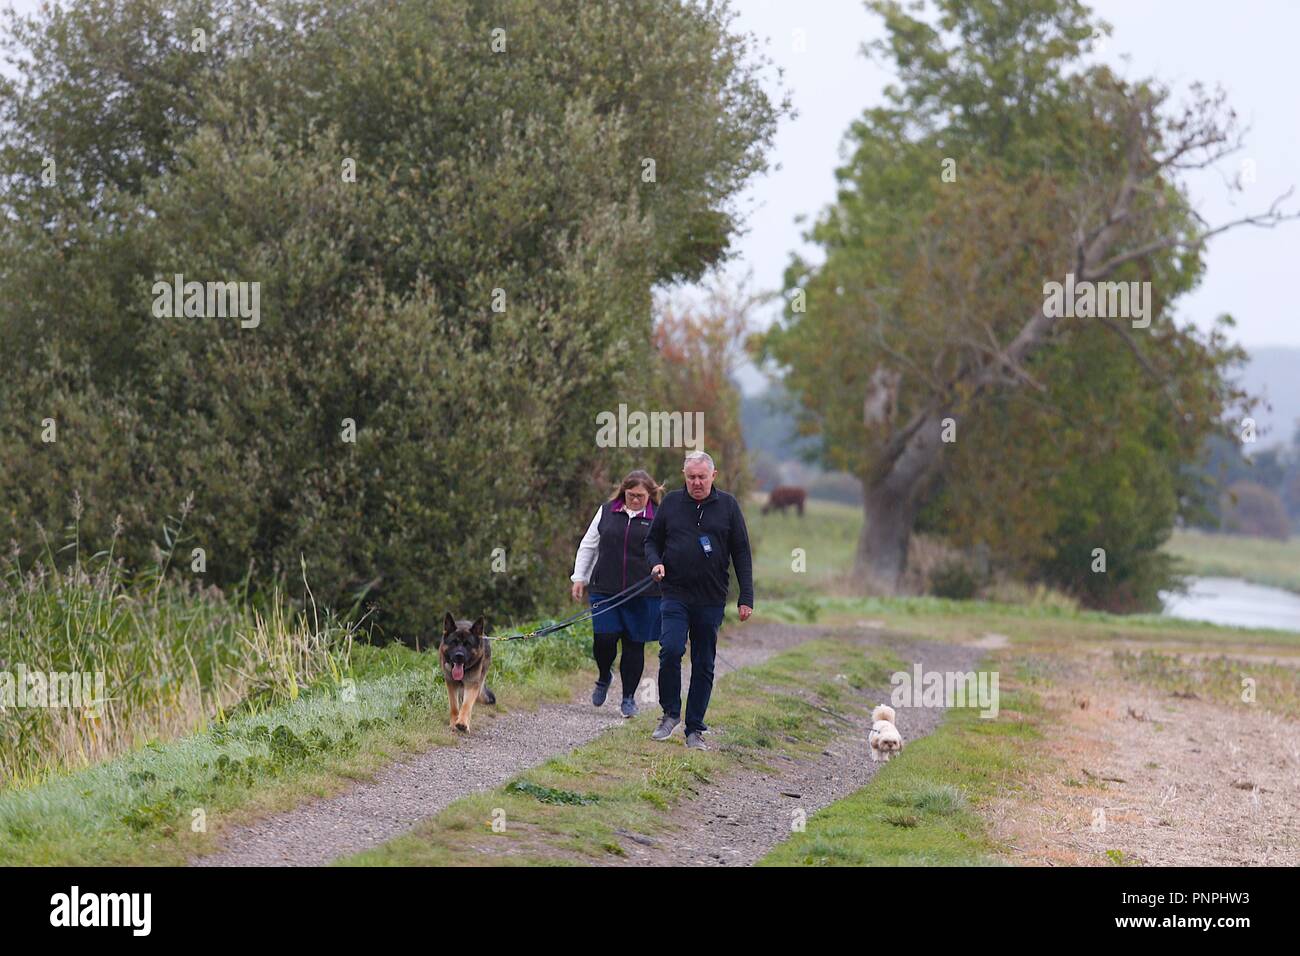 Ashford, Kent, UK. 22th Sep, 2018. UK Weather: The unsettled weather continues as it starts to pour down with rain in the village of Hamstreet just outside Ashford. A couple and their dogs walk along the sewer ditch tractor path. © Paul Lawrenson 2018, Photo Credit: Paul Lawrenson / Alamy Live News Stock Photo